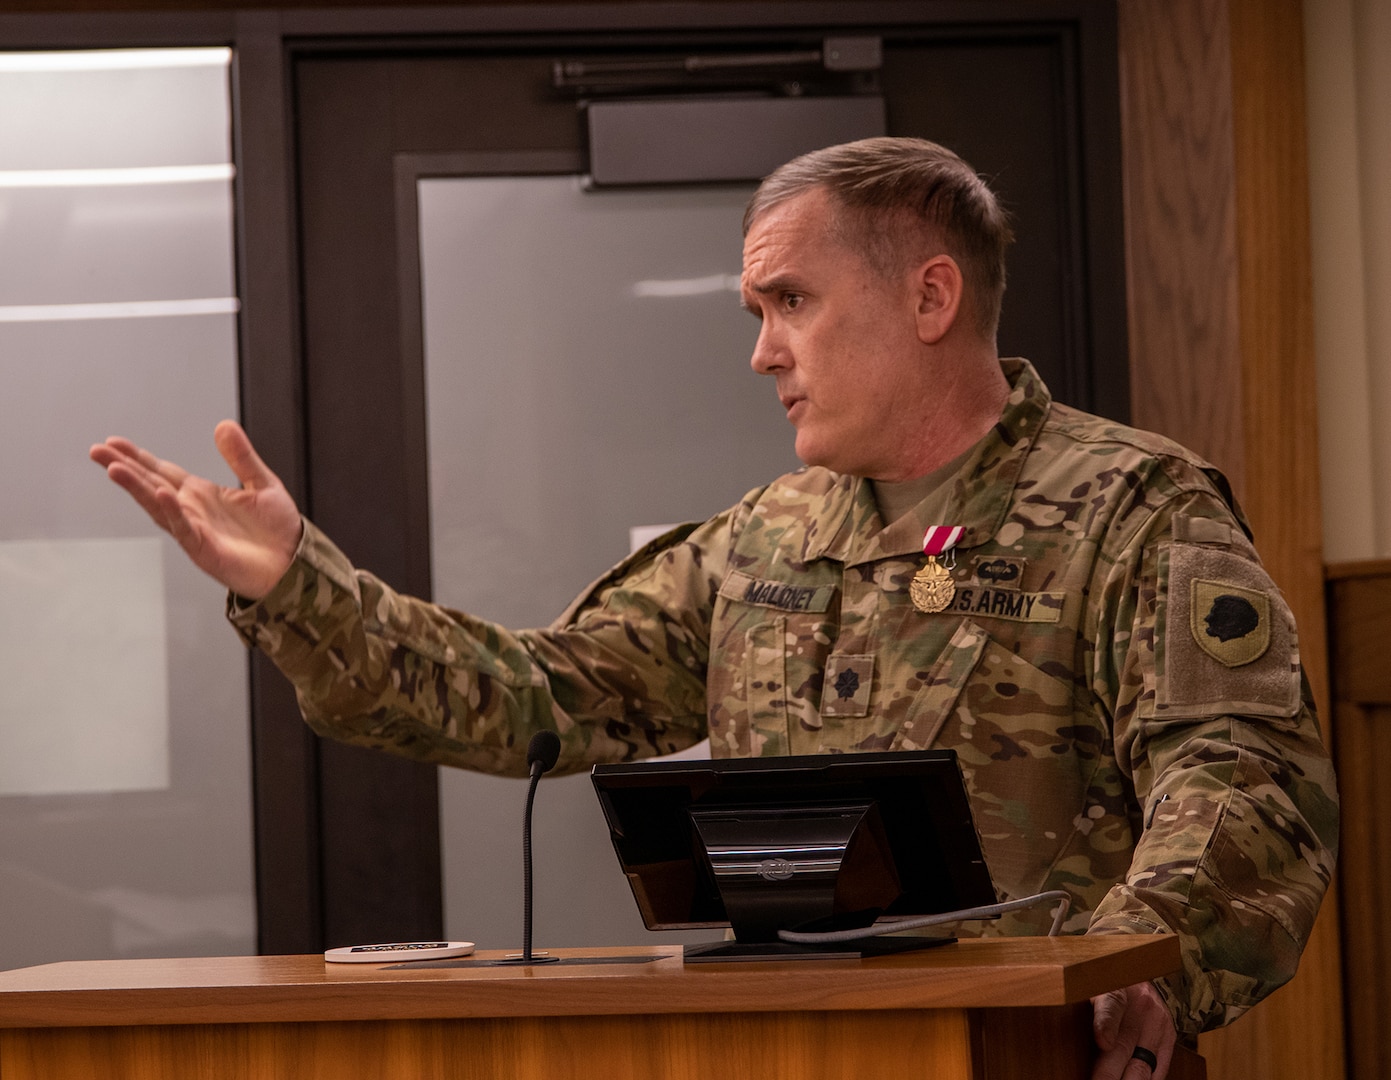 Illinois Army National Guard Lt. Col. Brian Maloney, of Champaign, Illinois, Comptroller, United States Property and Fiscal Office (USPFO), thanks family and friends during a retirement ceremony May 5 at Camp Lincoln, Springfield, Illinois